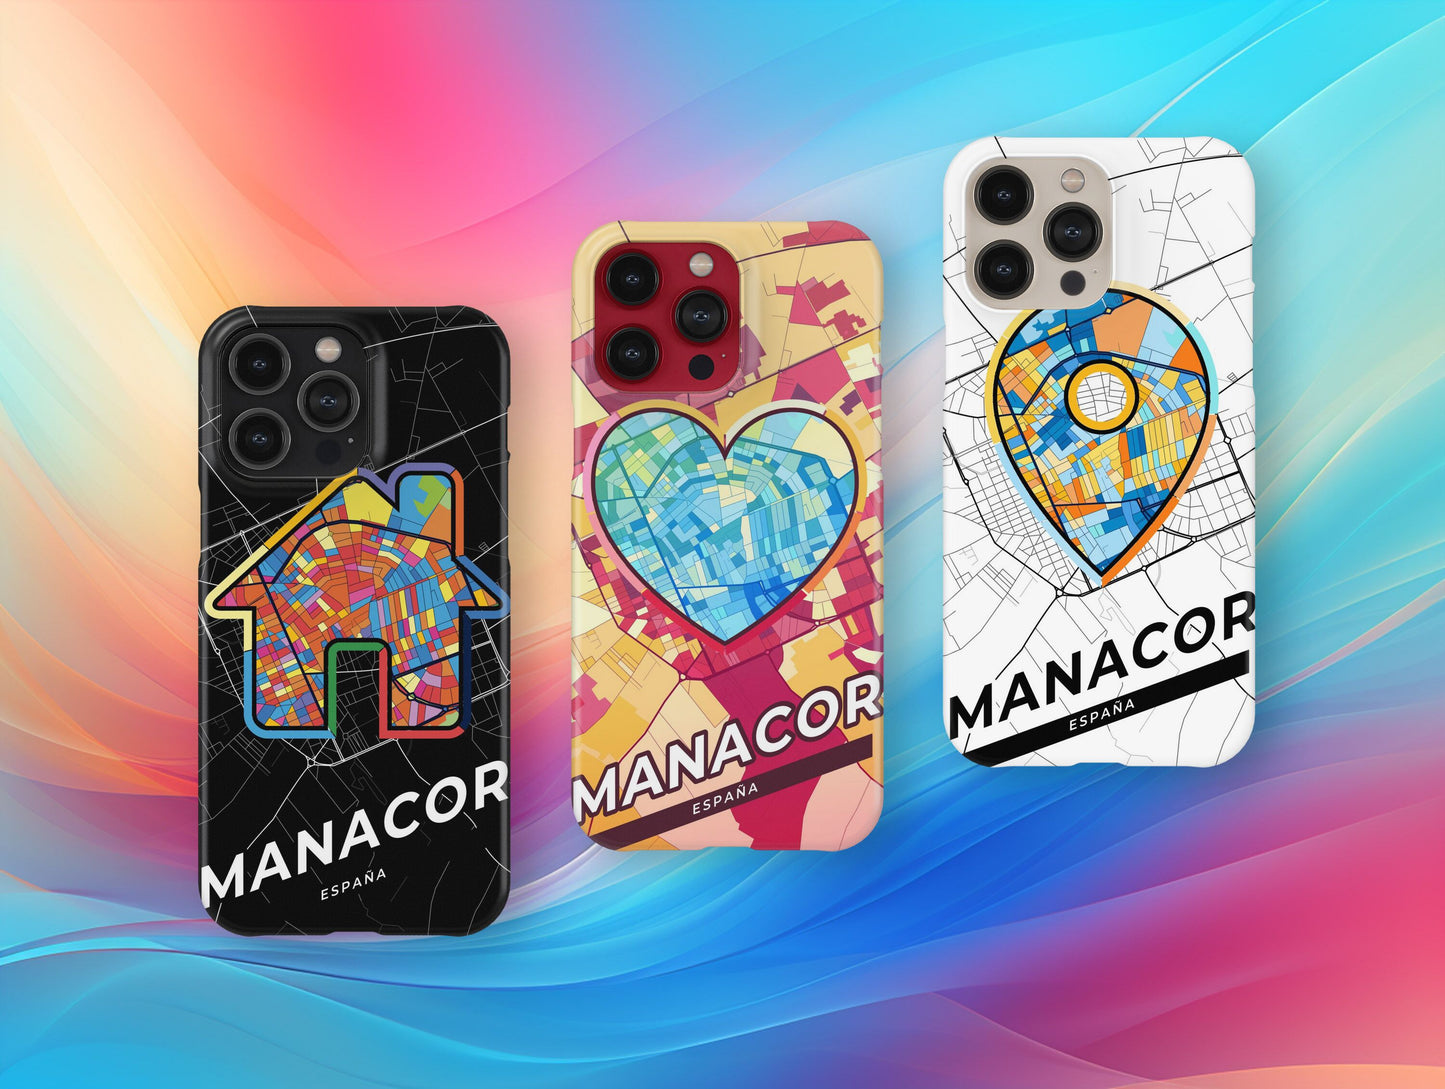 Manacor Spain slim phone case with colorful icon. Birthday, wedding or housewarming gift. Couple match cases.